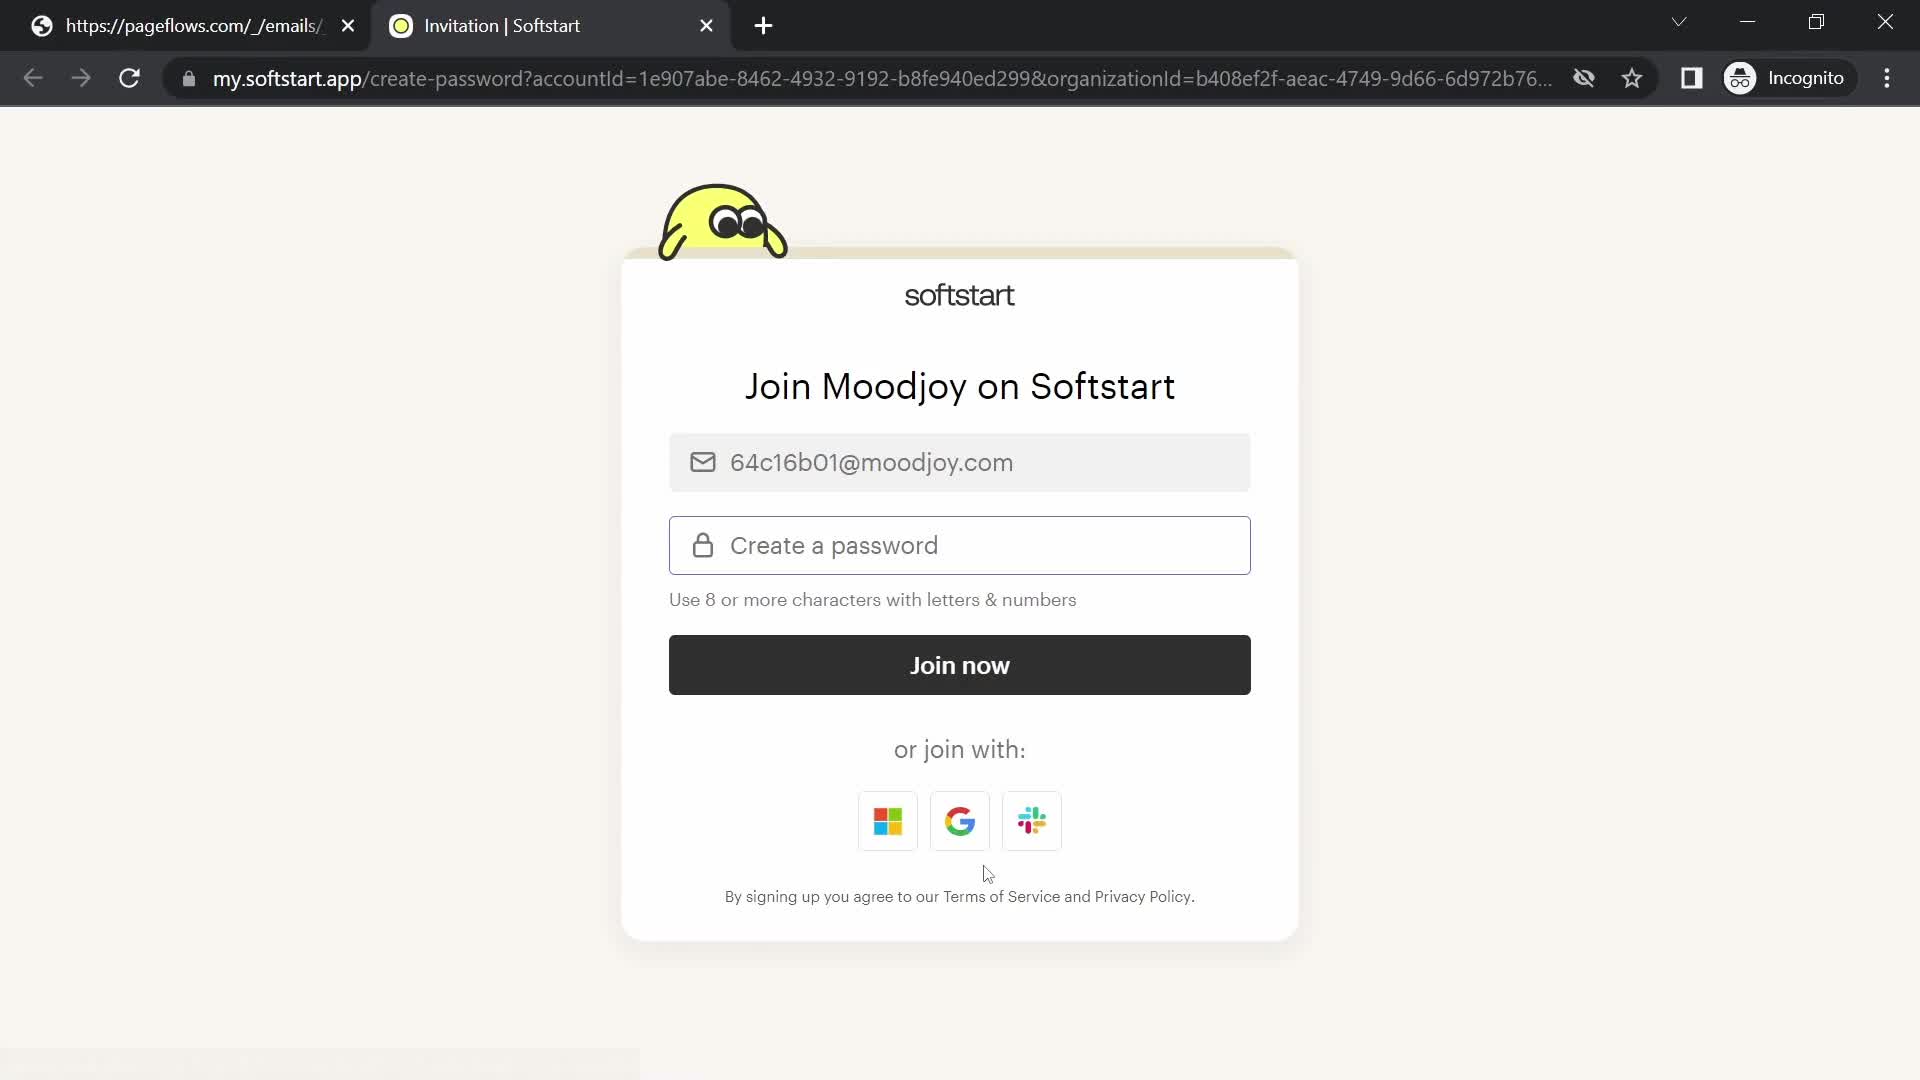 Screenshot of Sign up on Accepting an invite on Softstart user flow